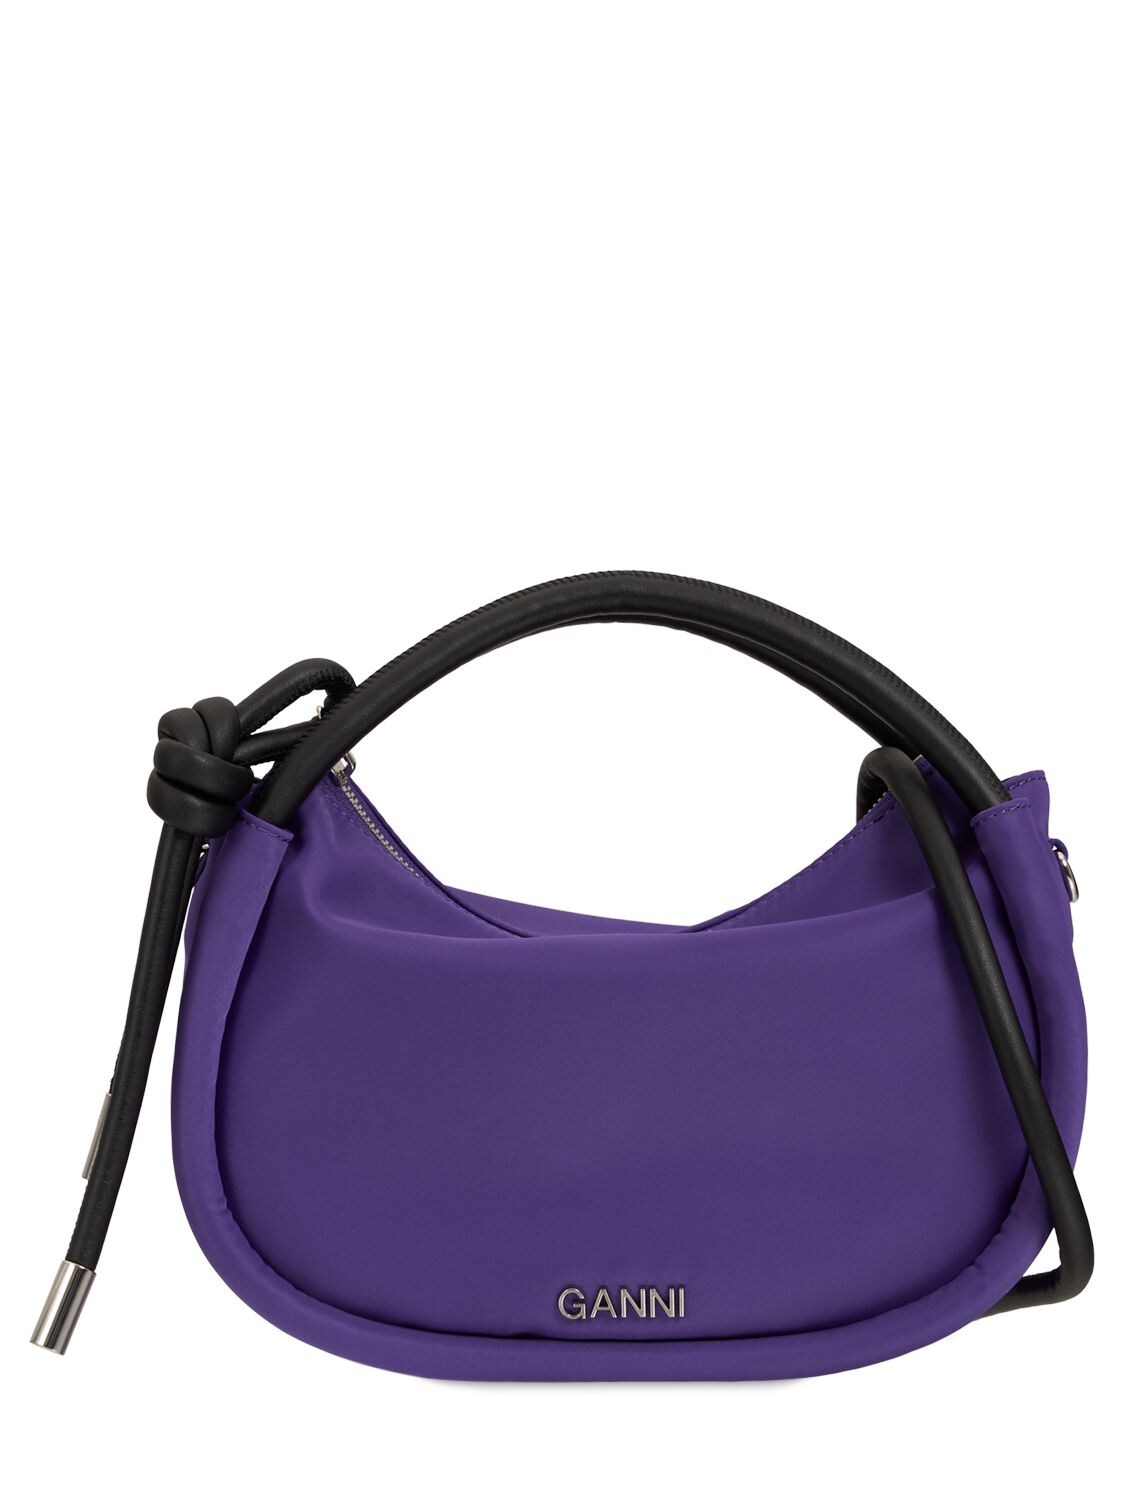 GANNI Small Knot Recycled Tech Top Handle Bag